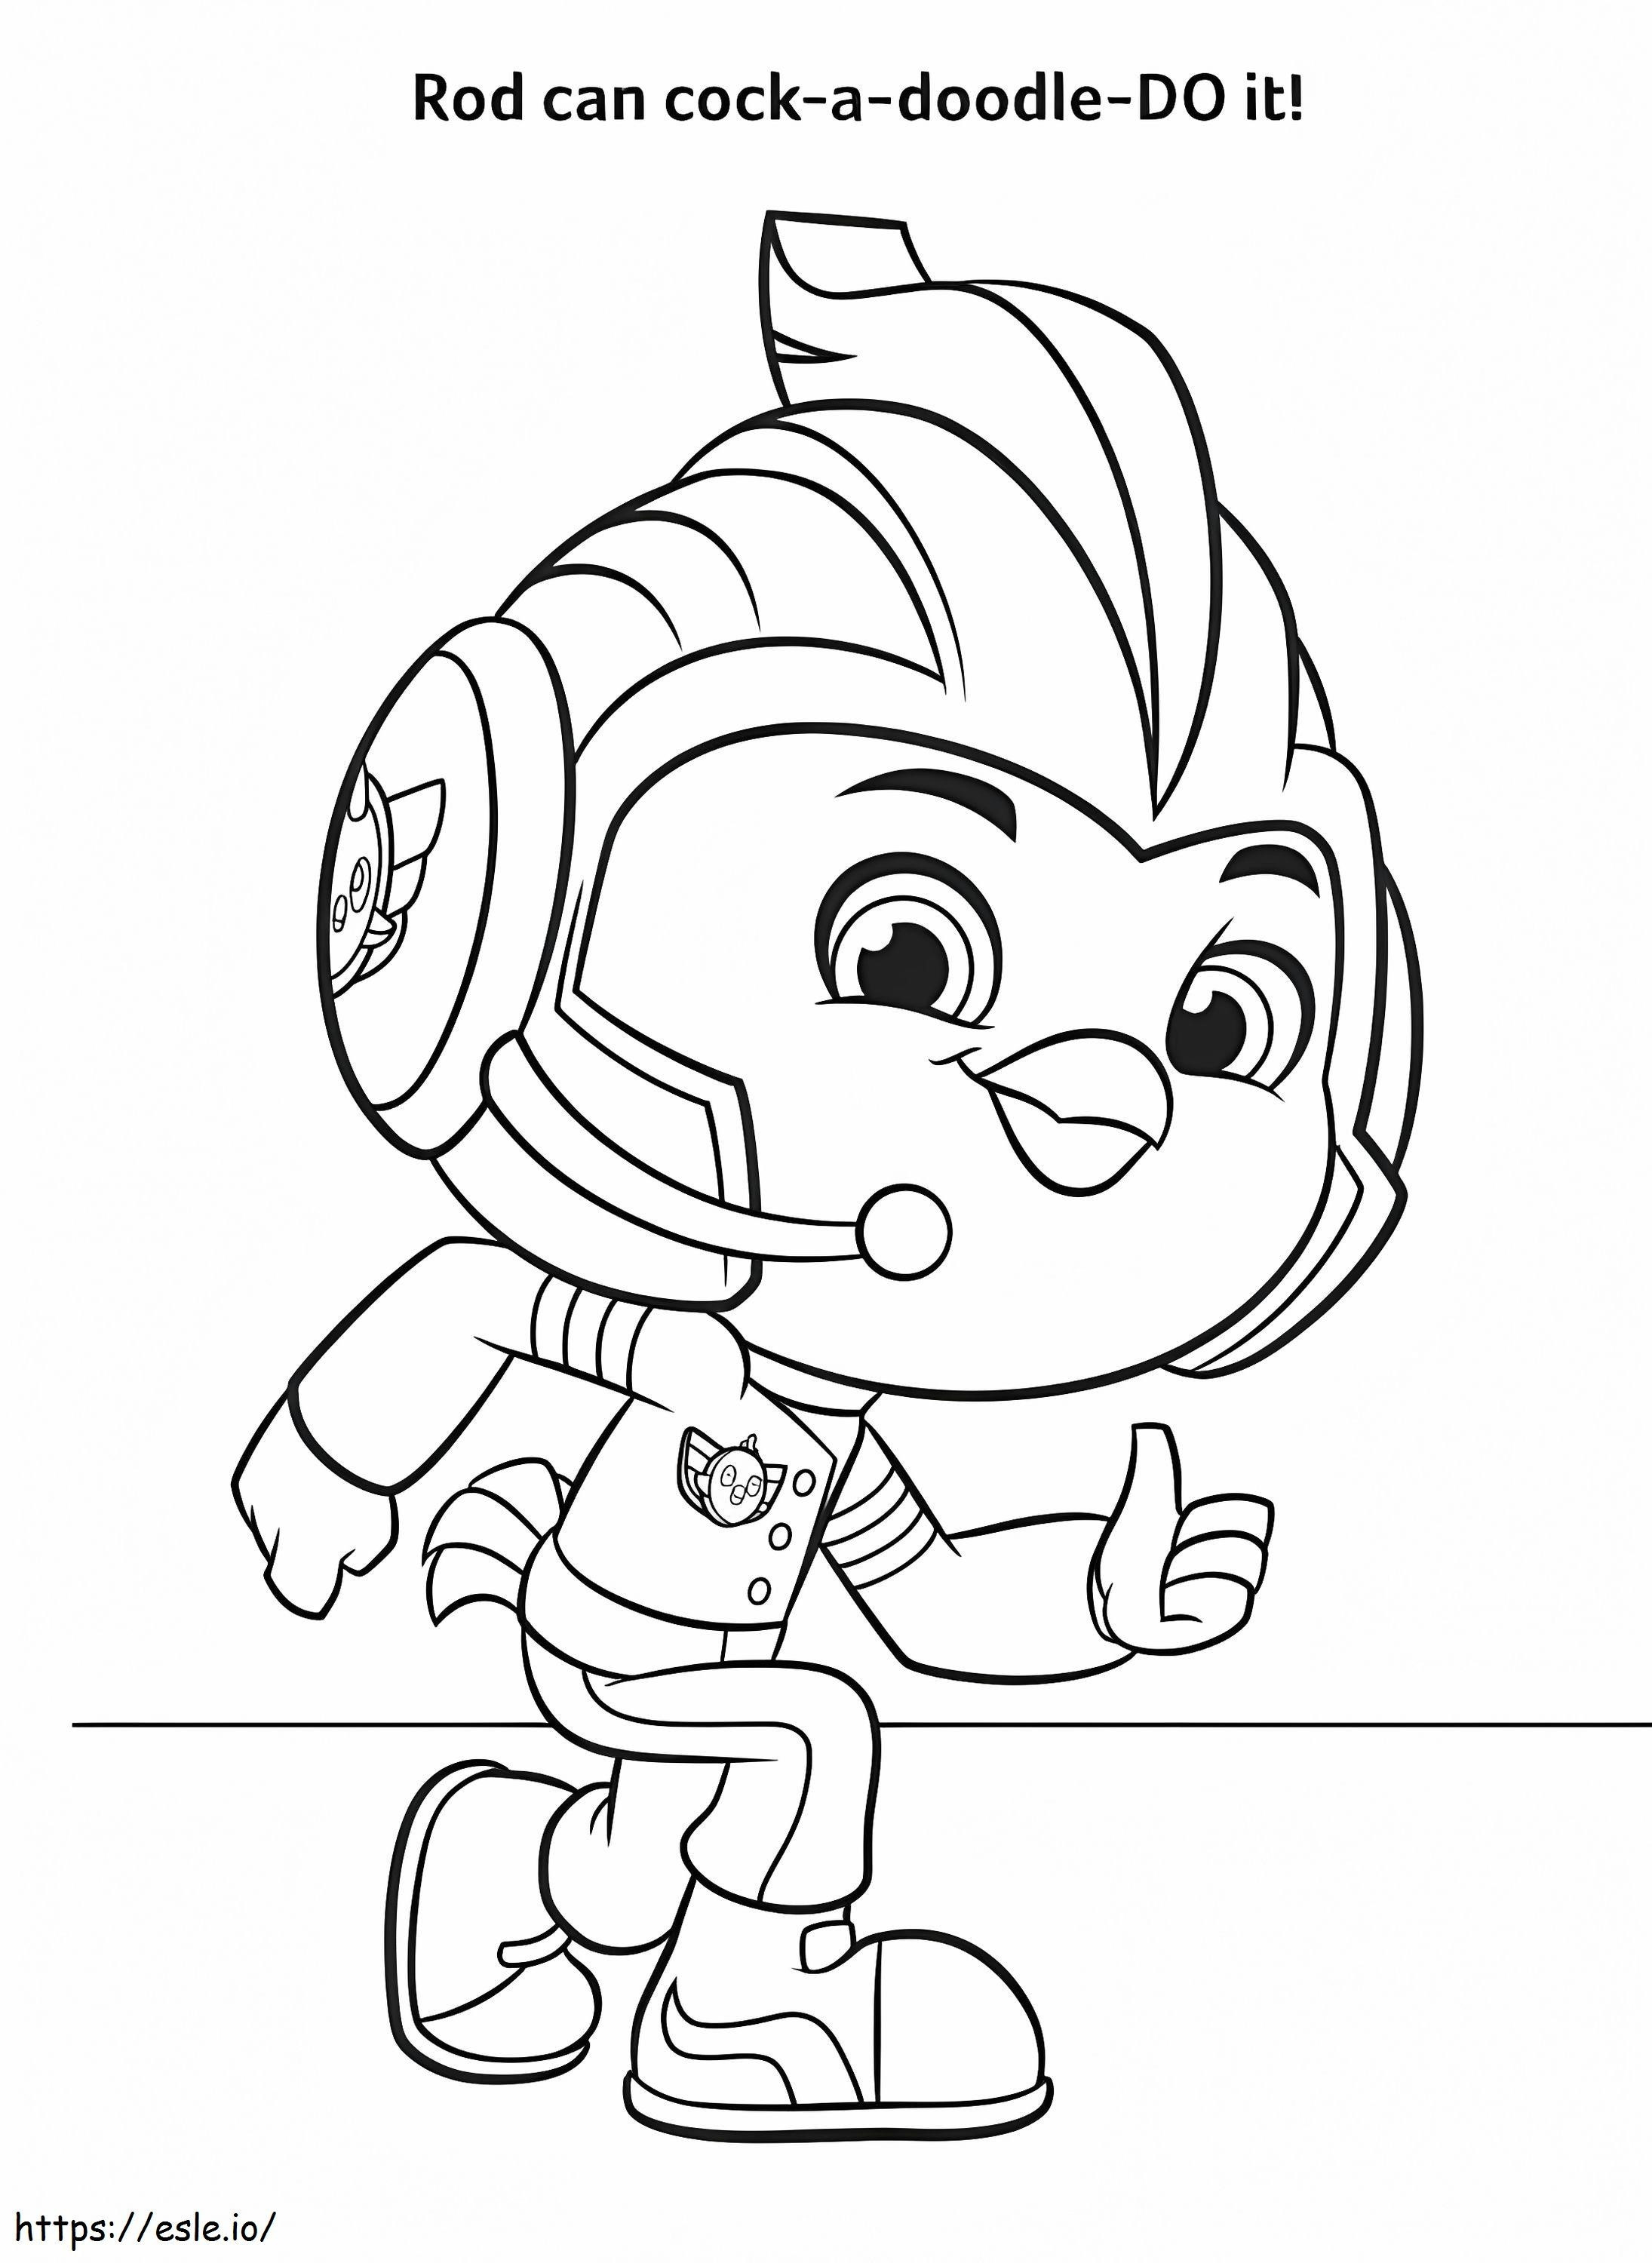 Top Wing Rod coloring page